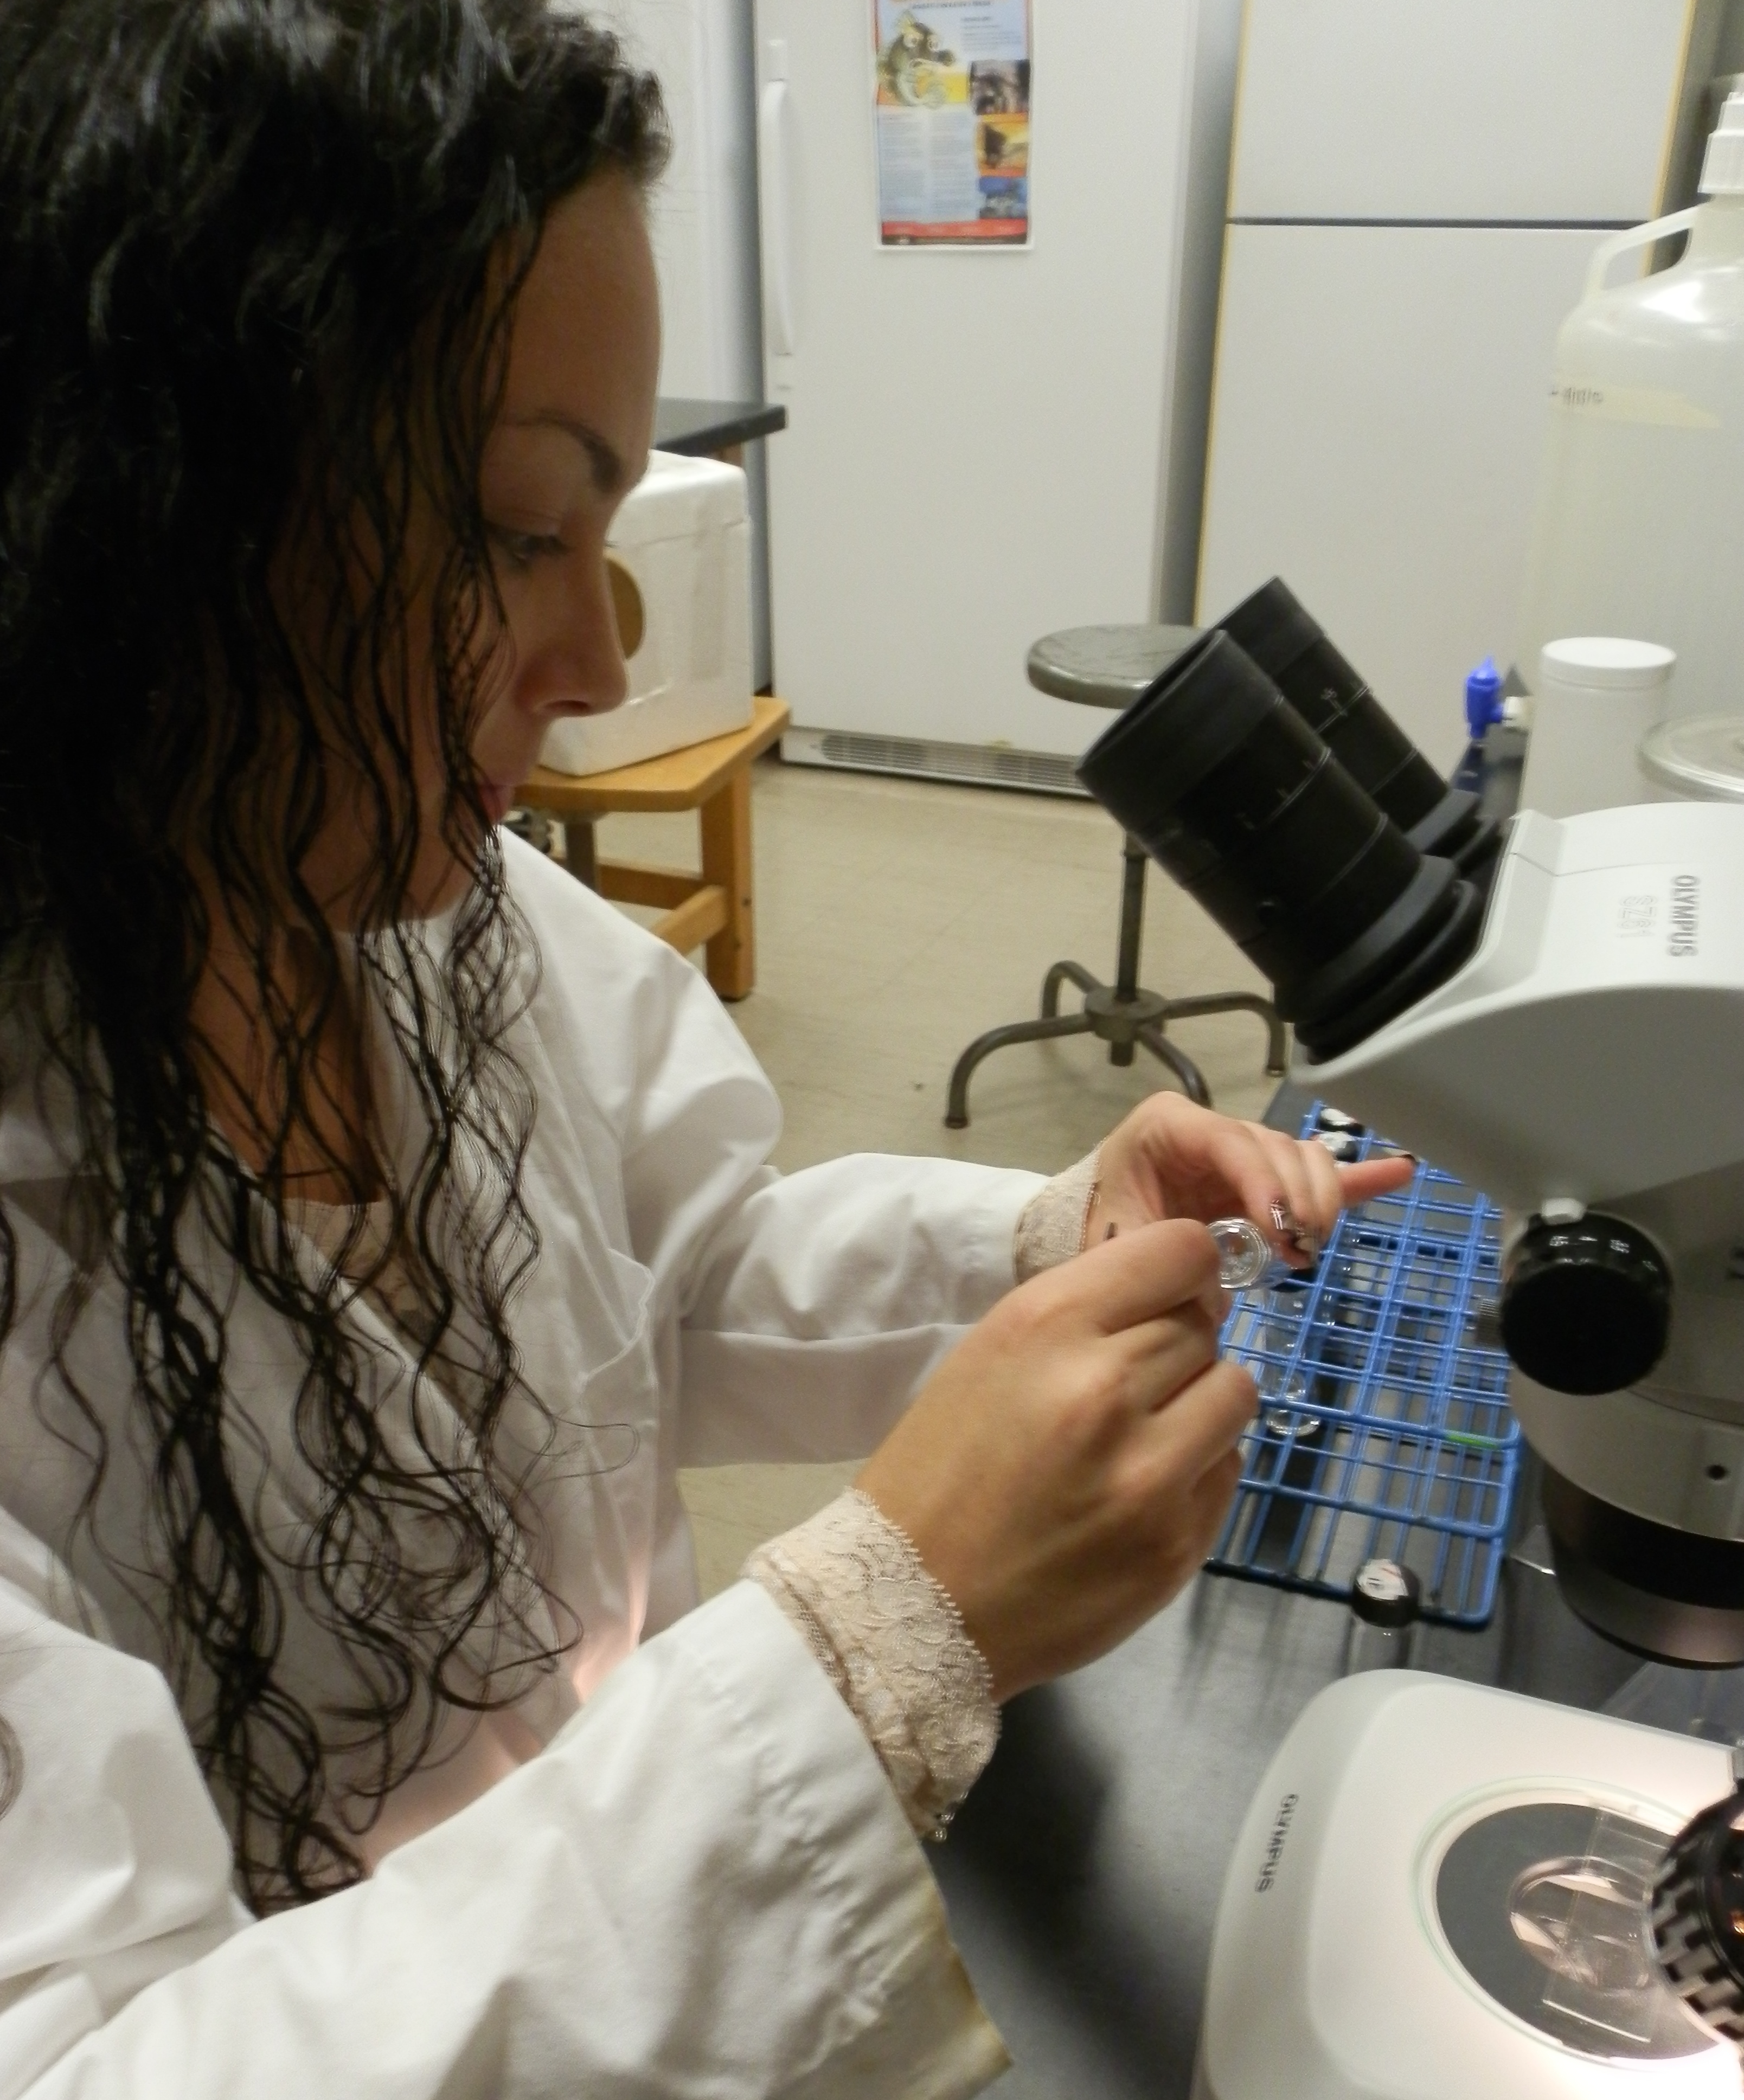 A person sitting in front of a microscope manipulating a vial. There is a slide waiting on the microscope.